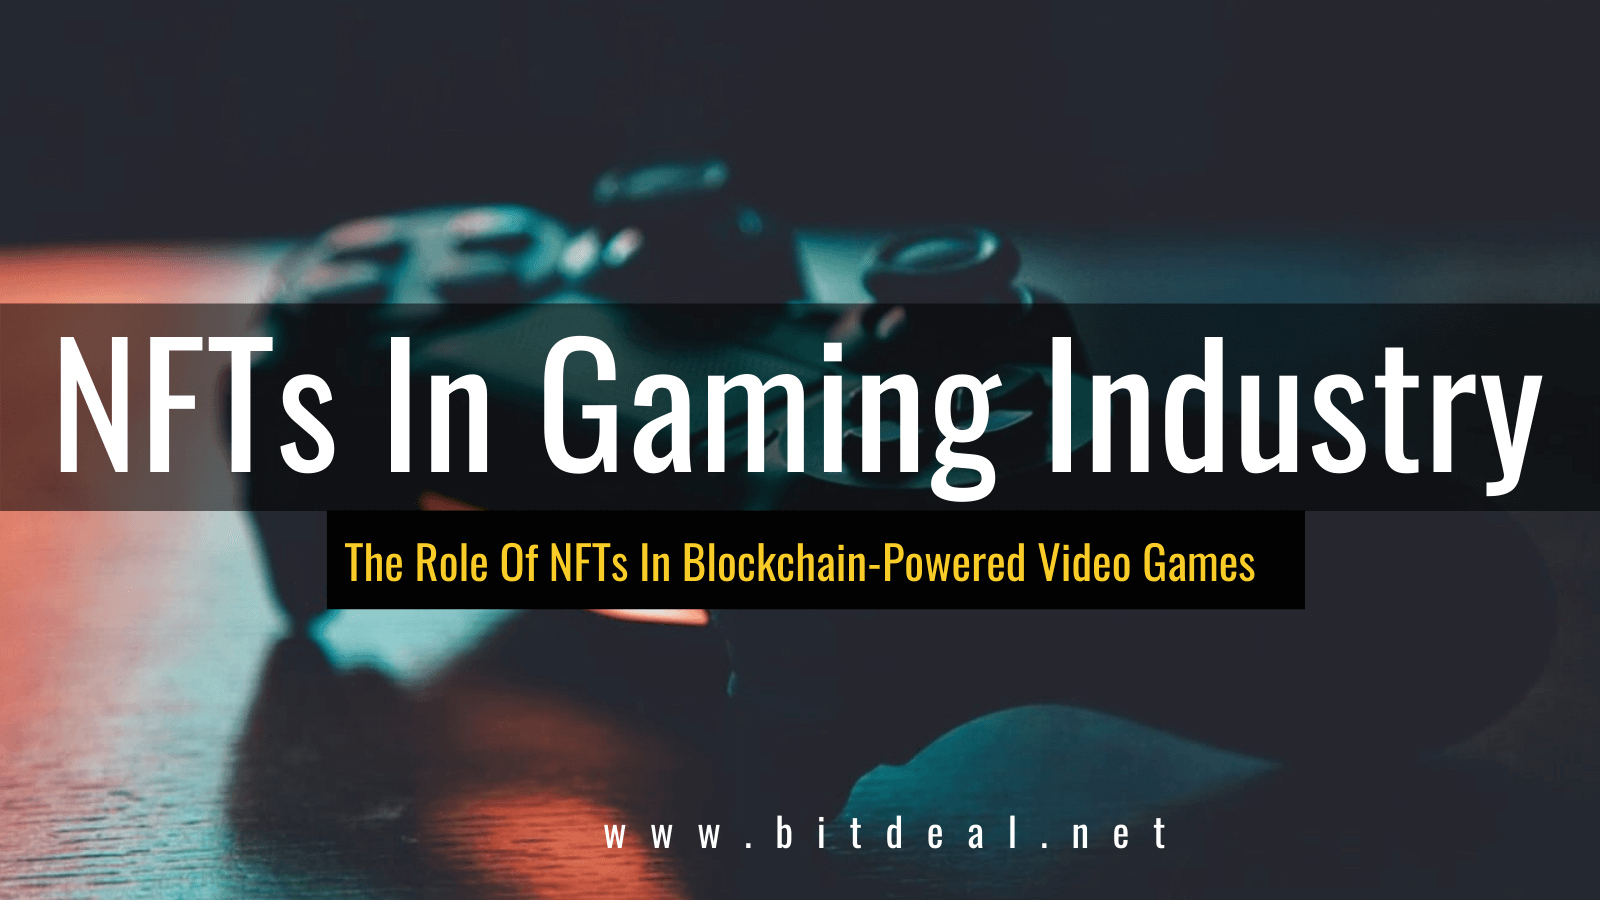 Article about How Non-Fungible Tokens (NFTs) Disrupt The Gaming Industry